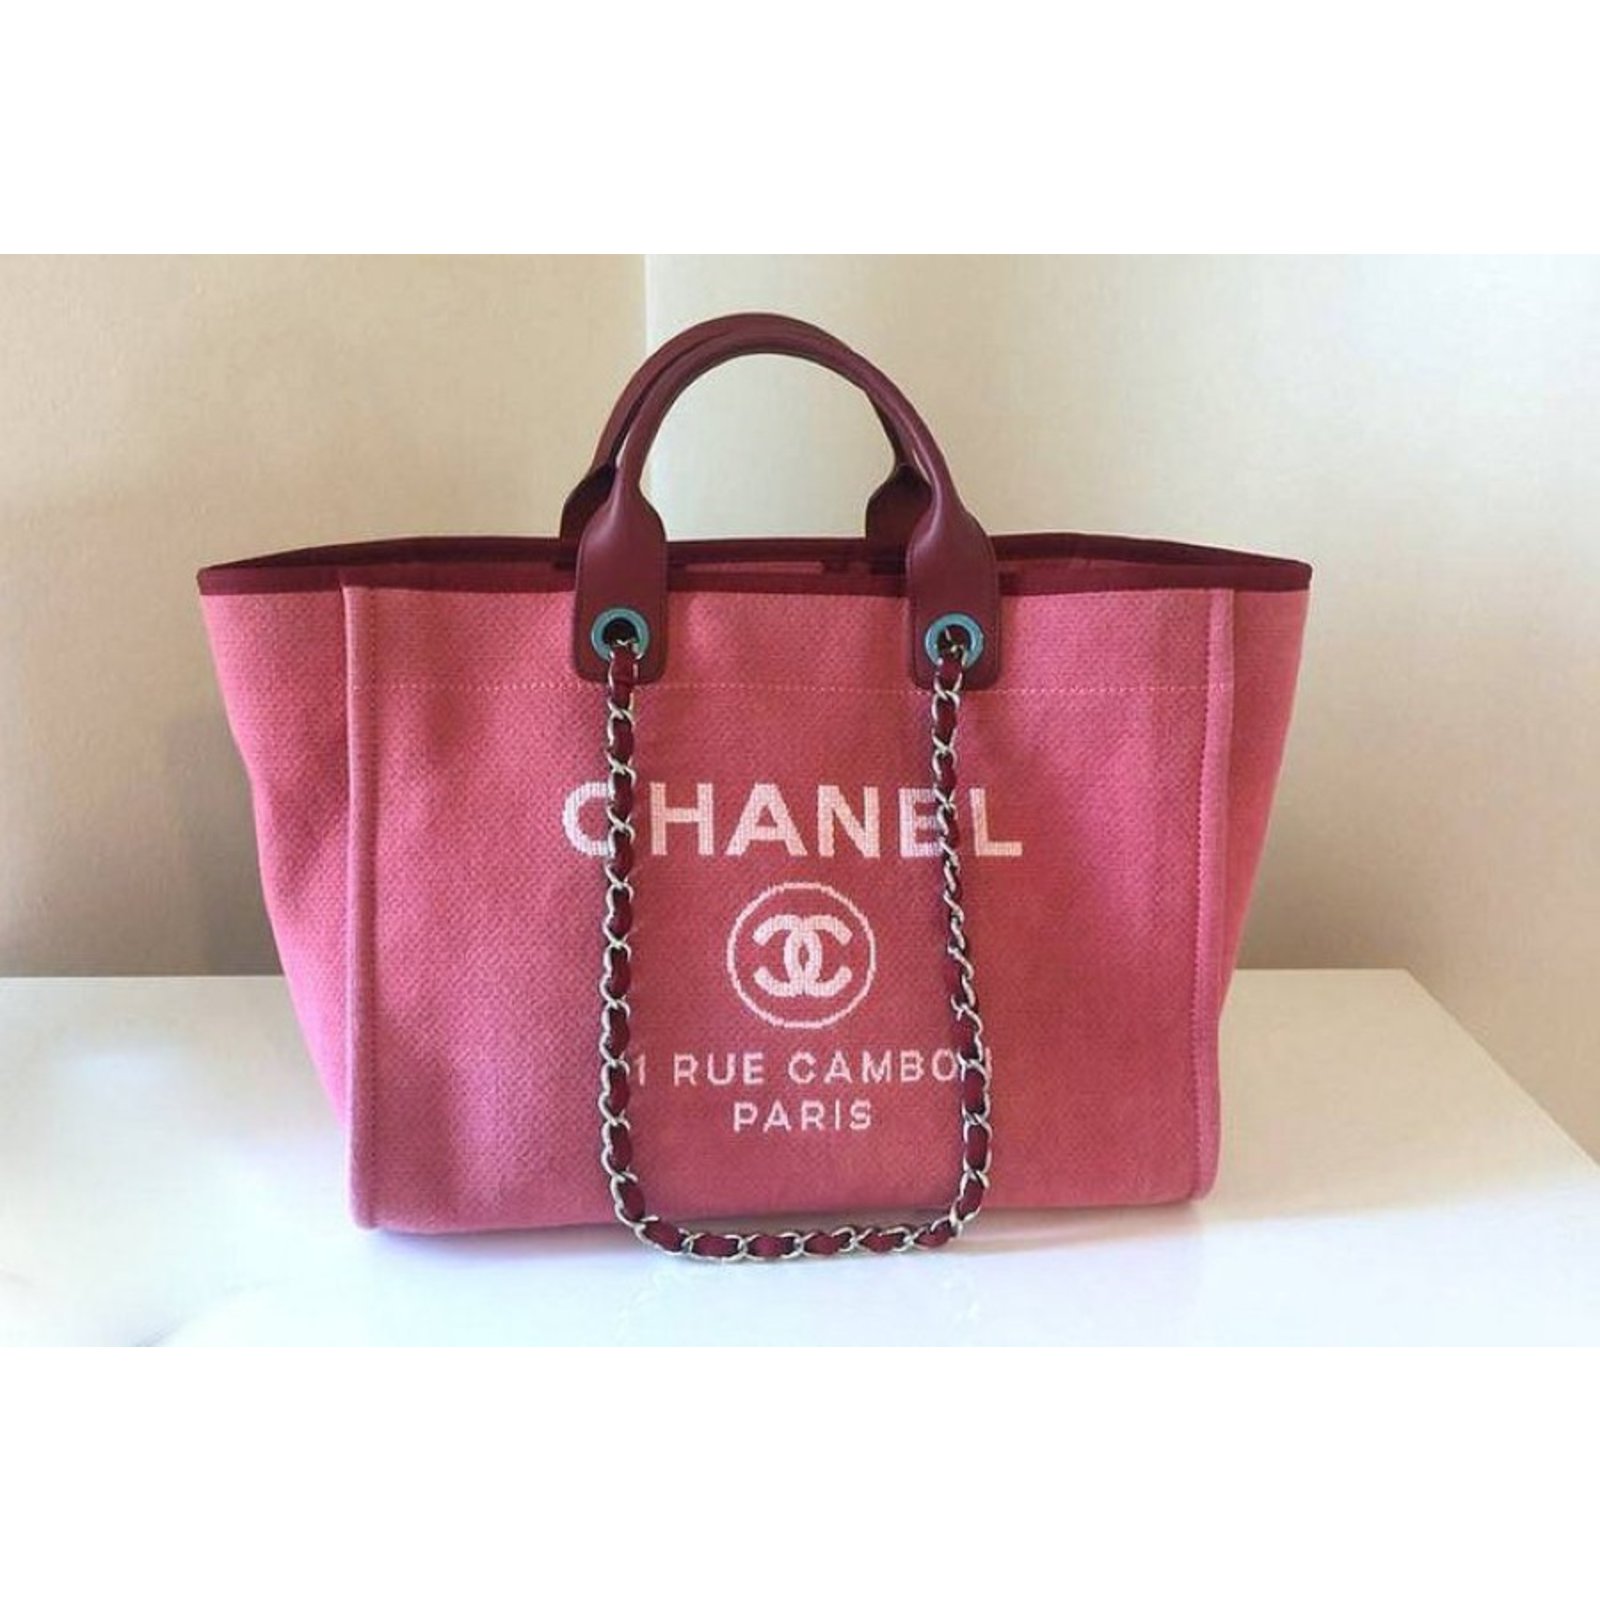 CHANEL Canvas Calfskin Striped Large Deauville Tote Pink Blue